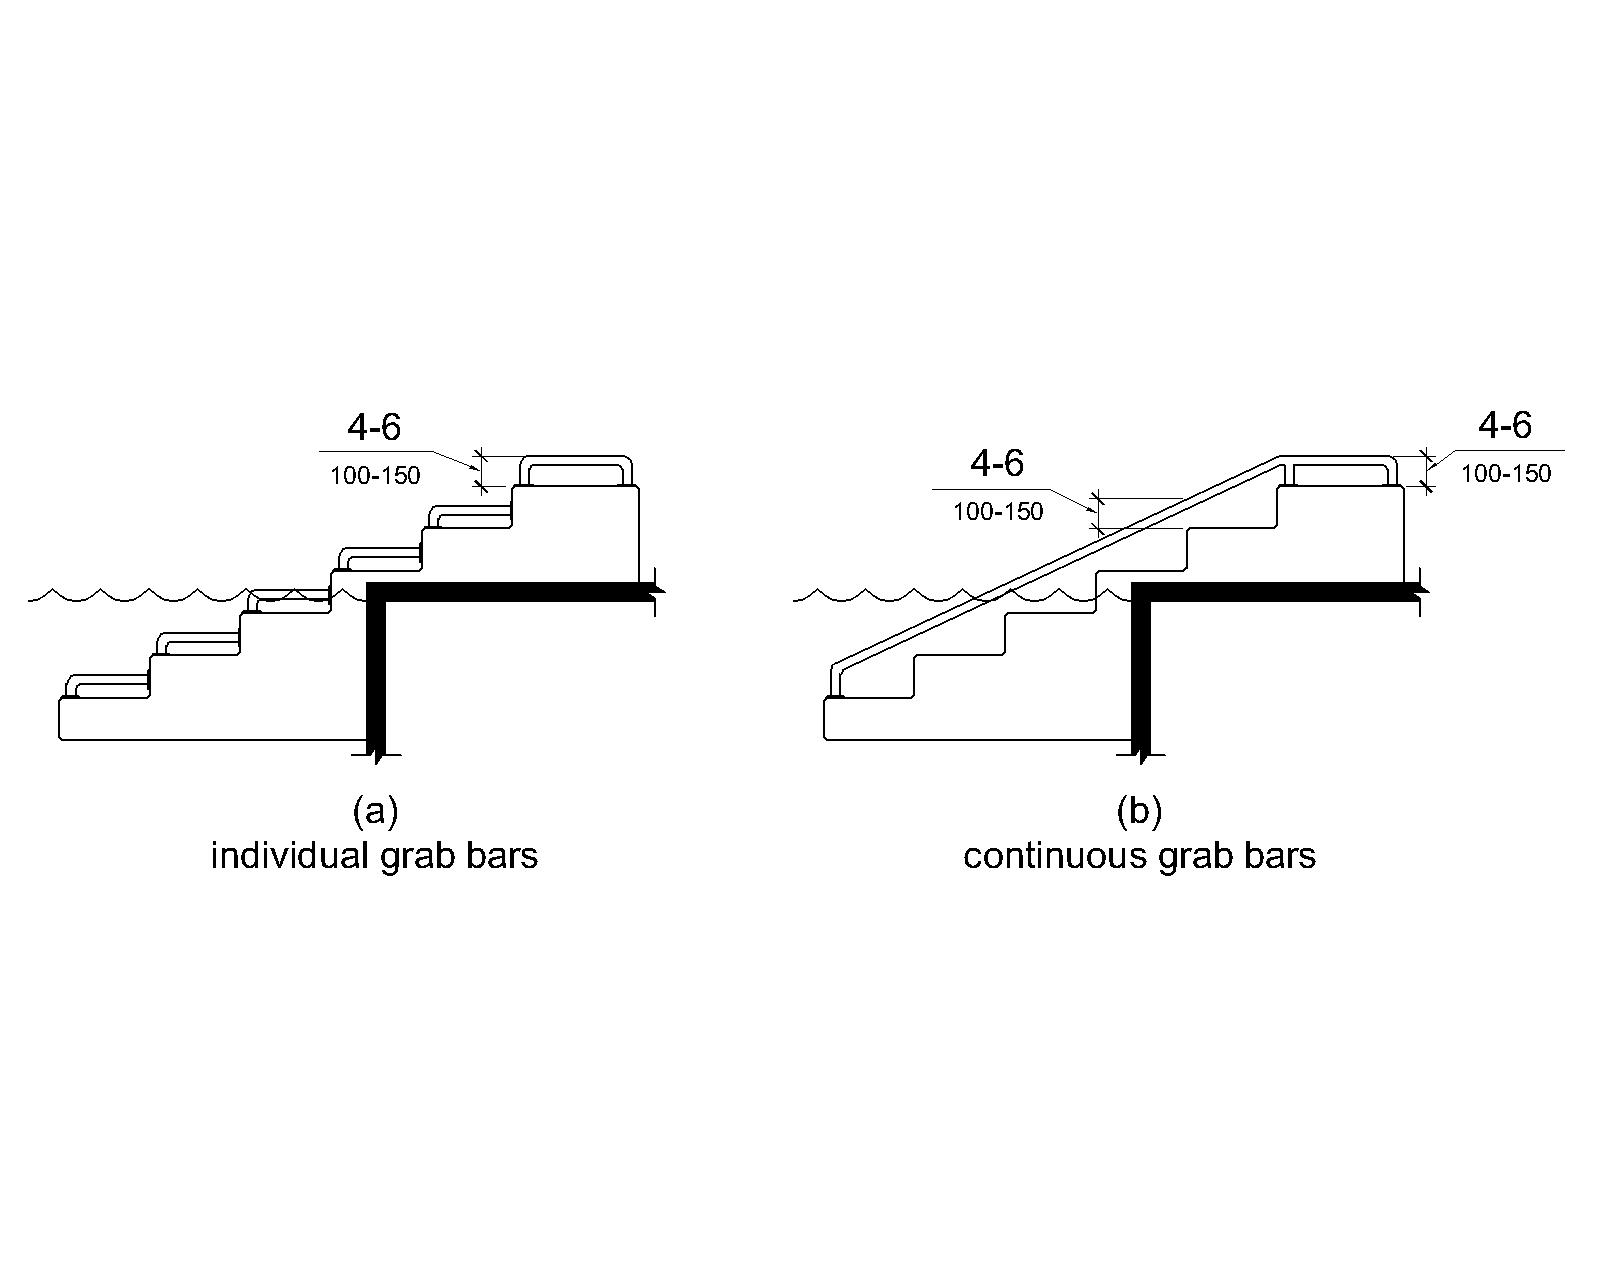 Two elevation drawings show grab bars at transfer systems.Figure (a) shows individual grab bars on the platform and each step with the top of the gripping surface 4 to 6 inches (100 to 150 mm) above each step and transfer platform.Figure (b) shows a continuous grab bar with the top of the gripping surface 4 to 6 inches (100 to 150) above the step nosing and transfer platform.